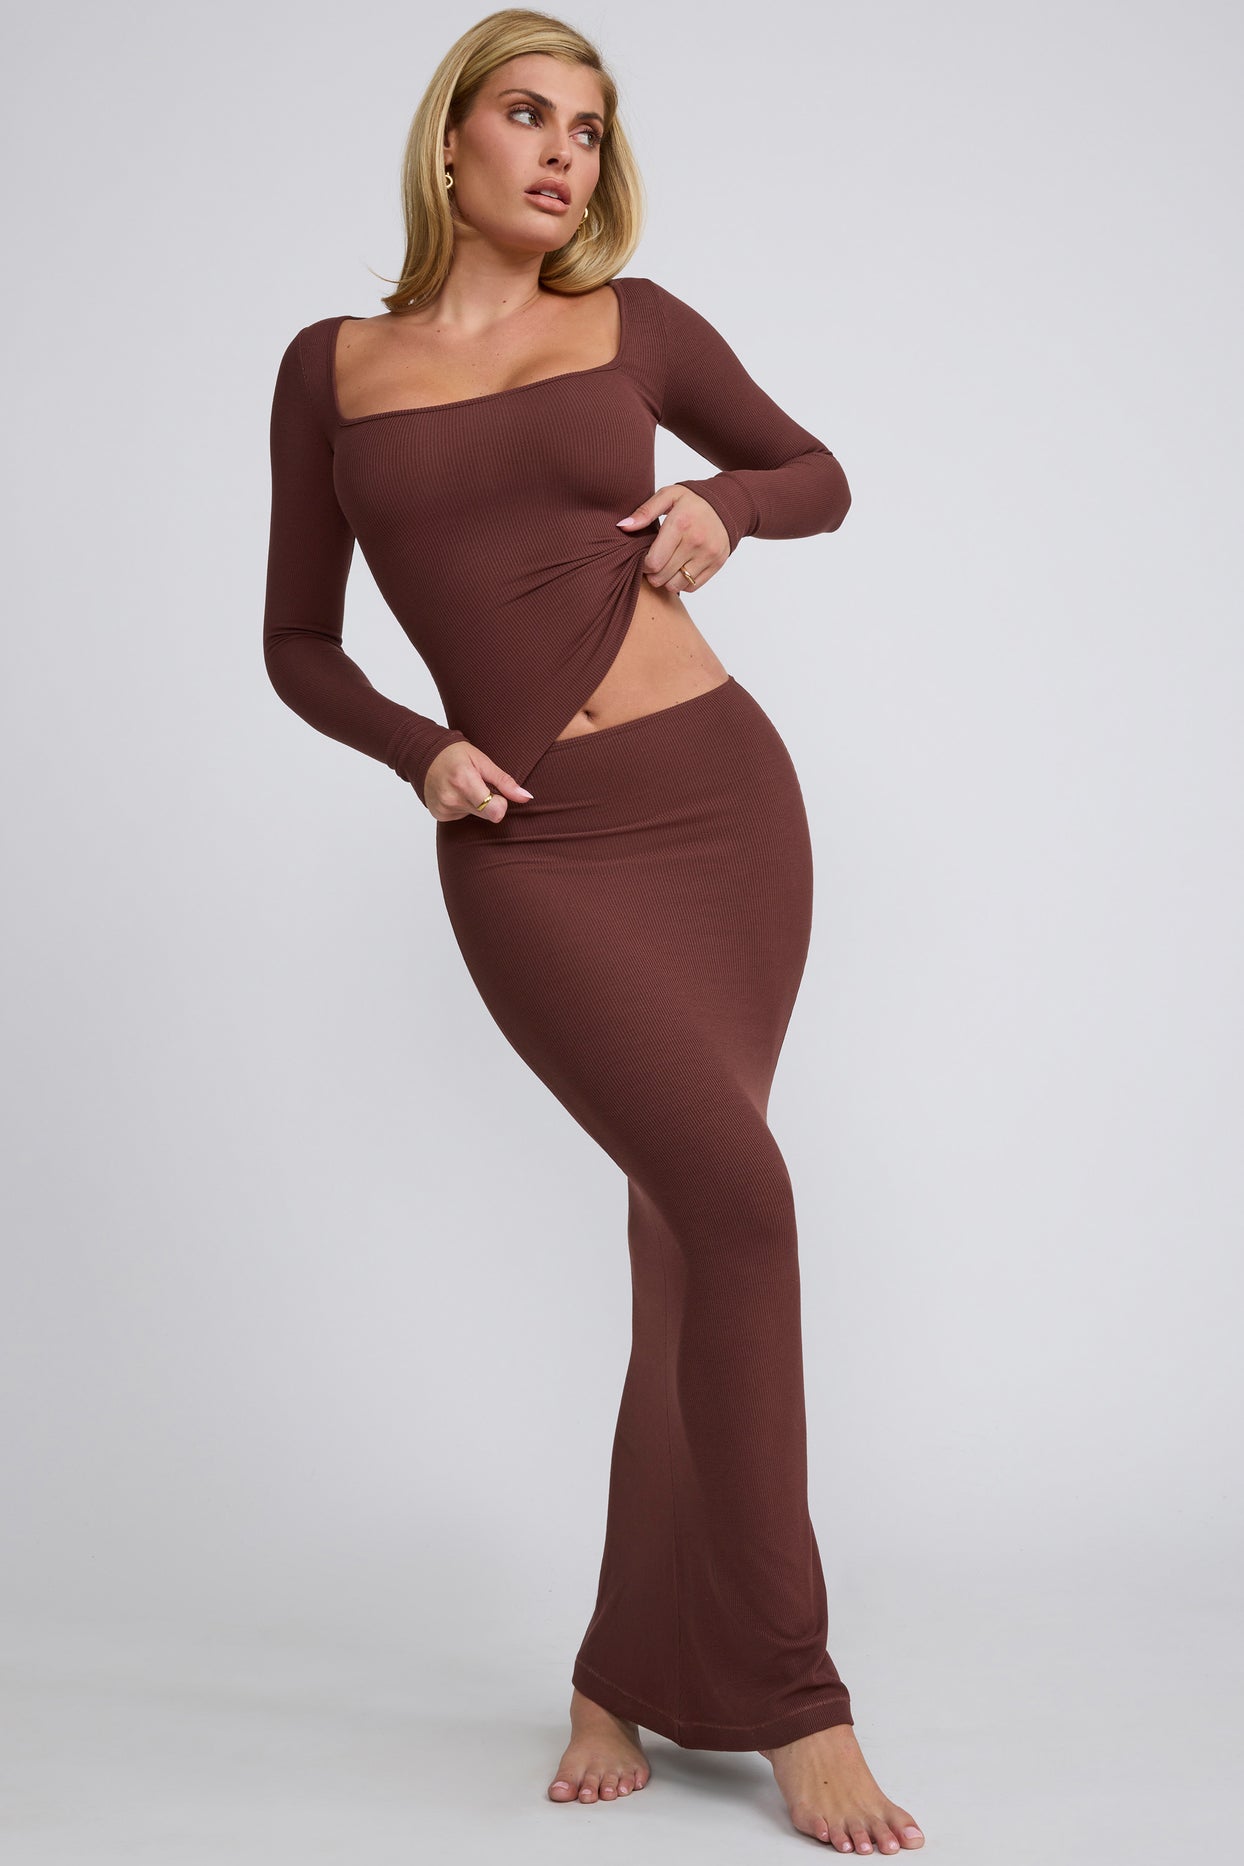 Ribbed Modal  Long Sleeve Top in Chocolate